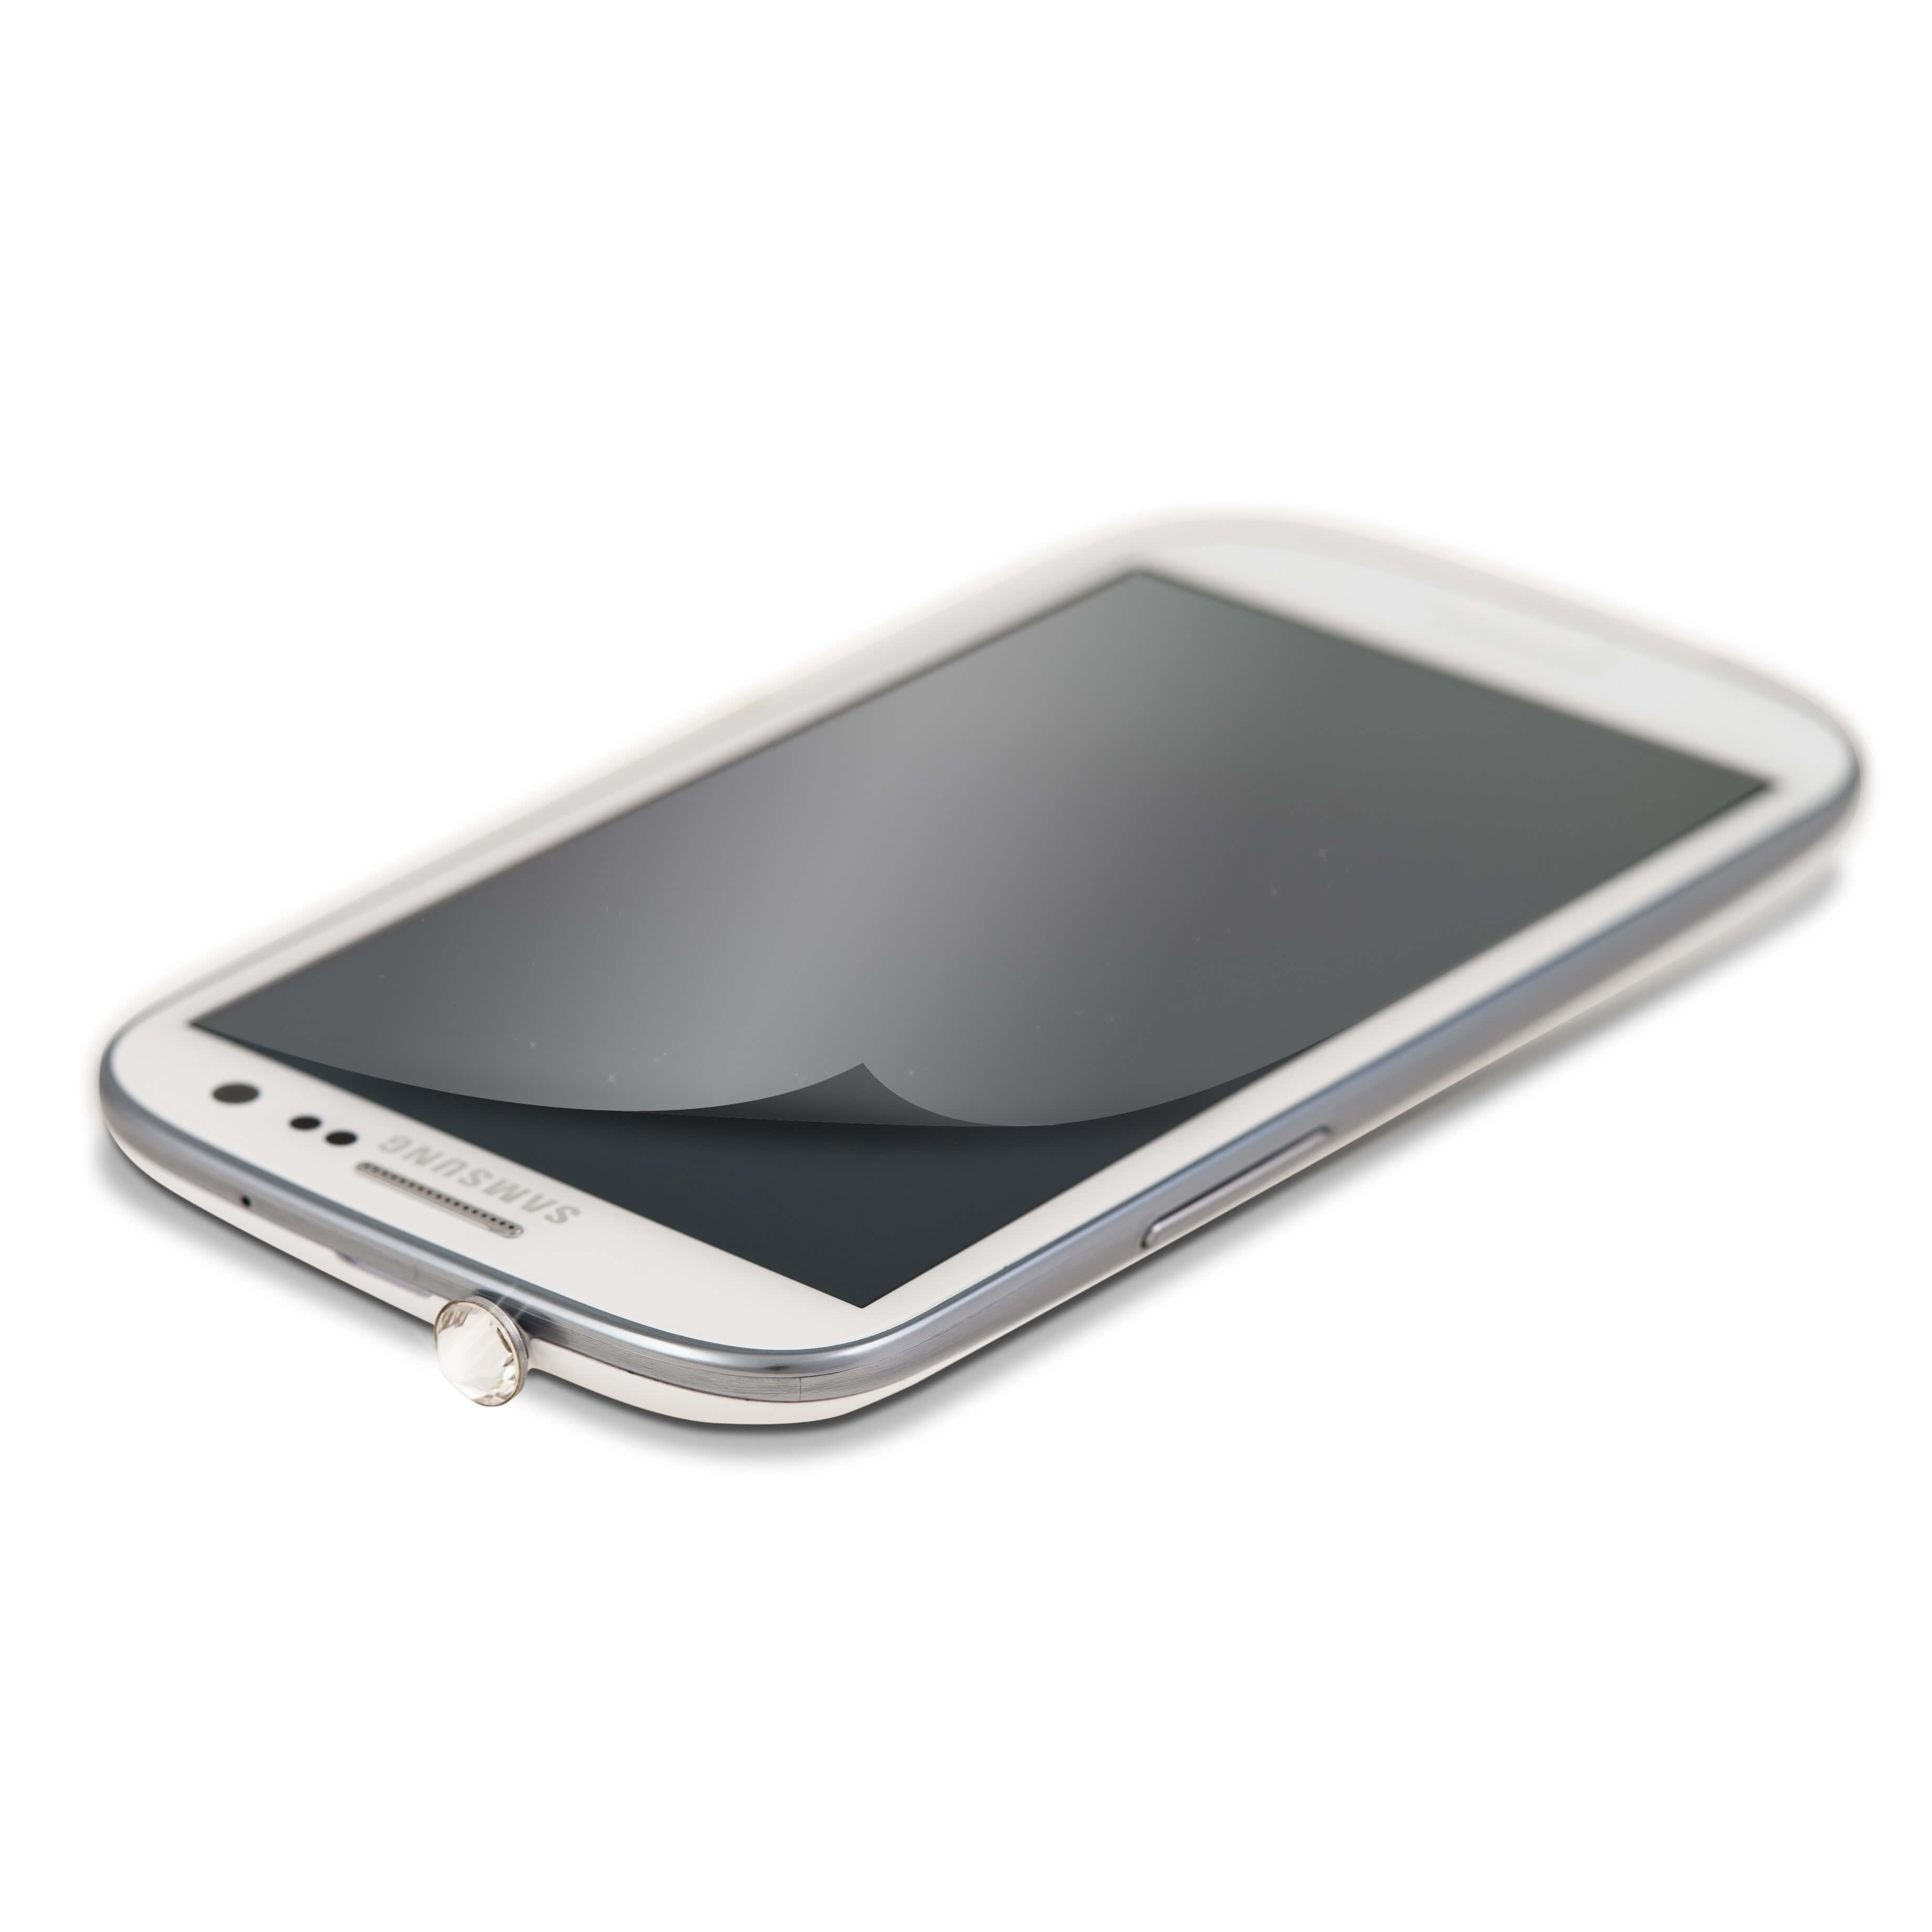 Crystal Pin for Samsung Galax y S III, white